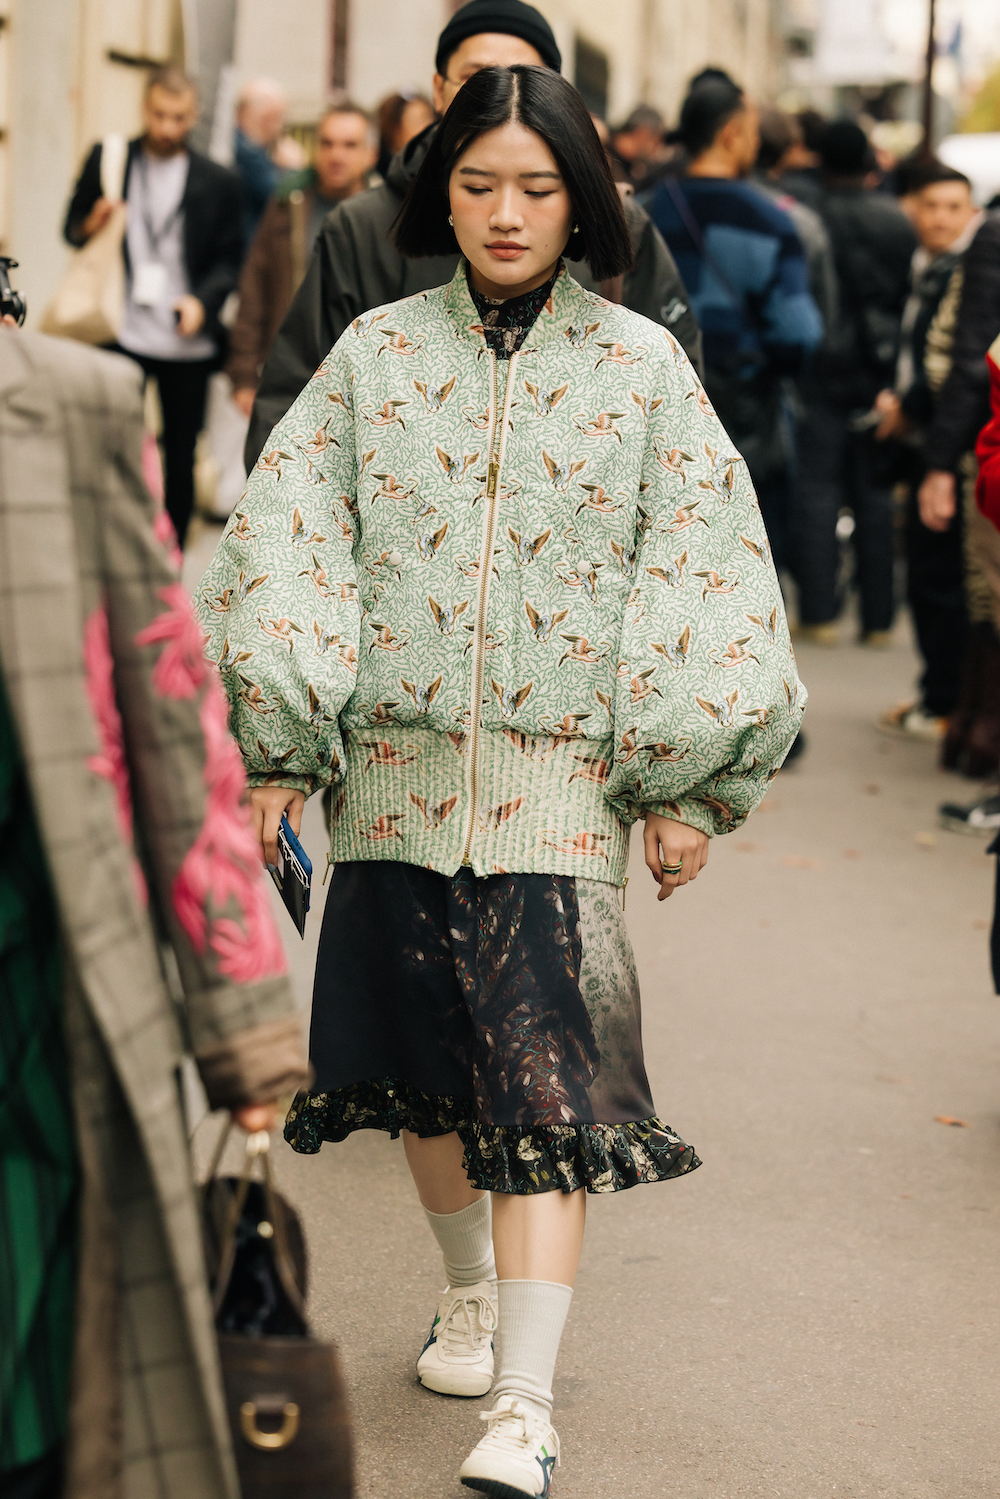 The Best Street Style Looks from Milan Fashion Week SS21